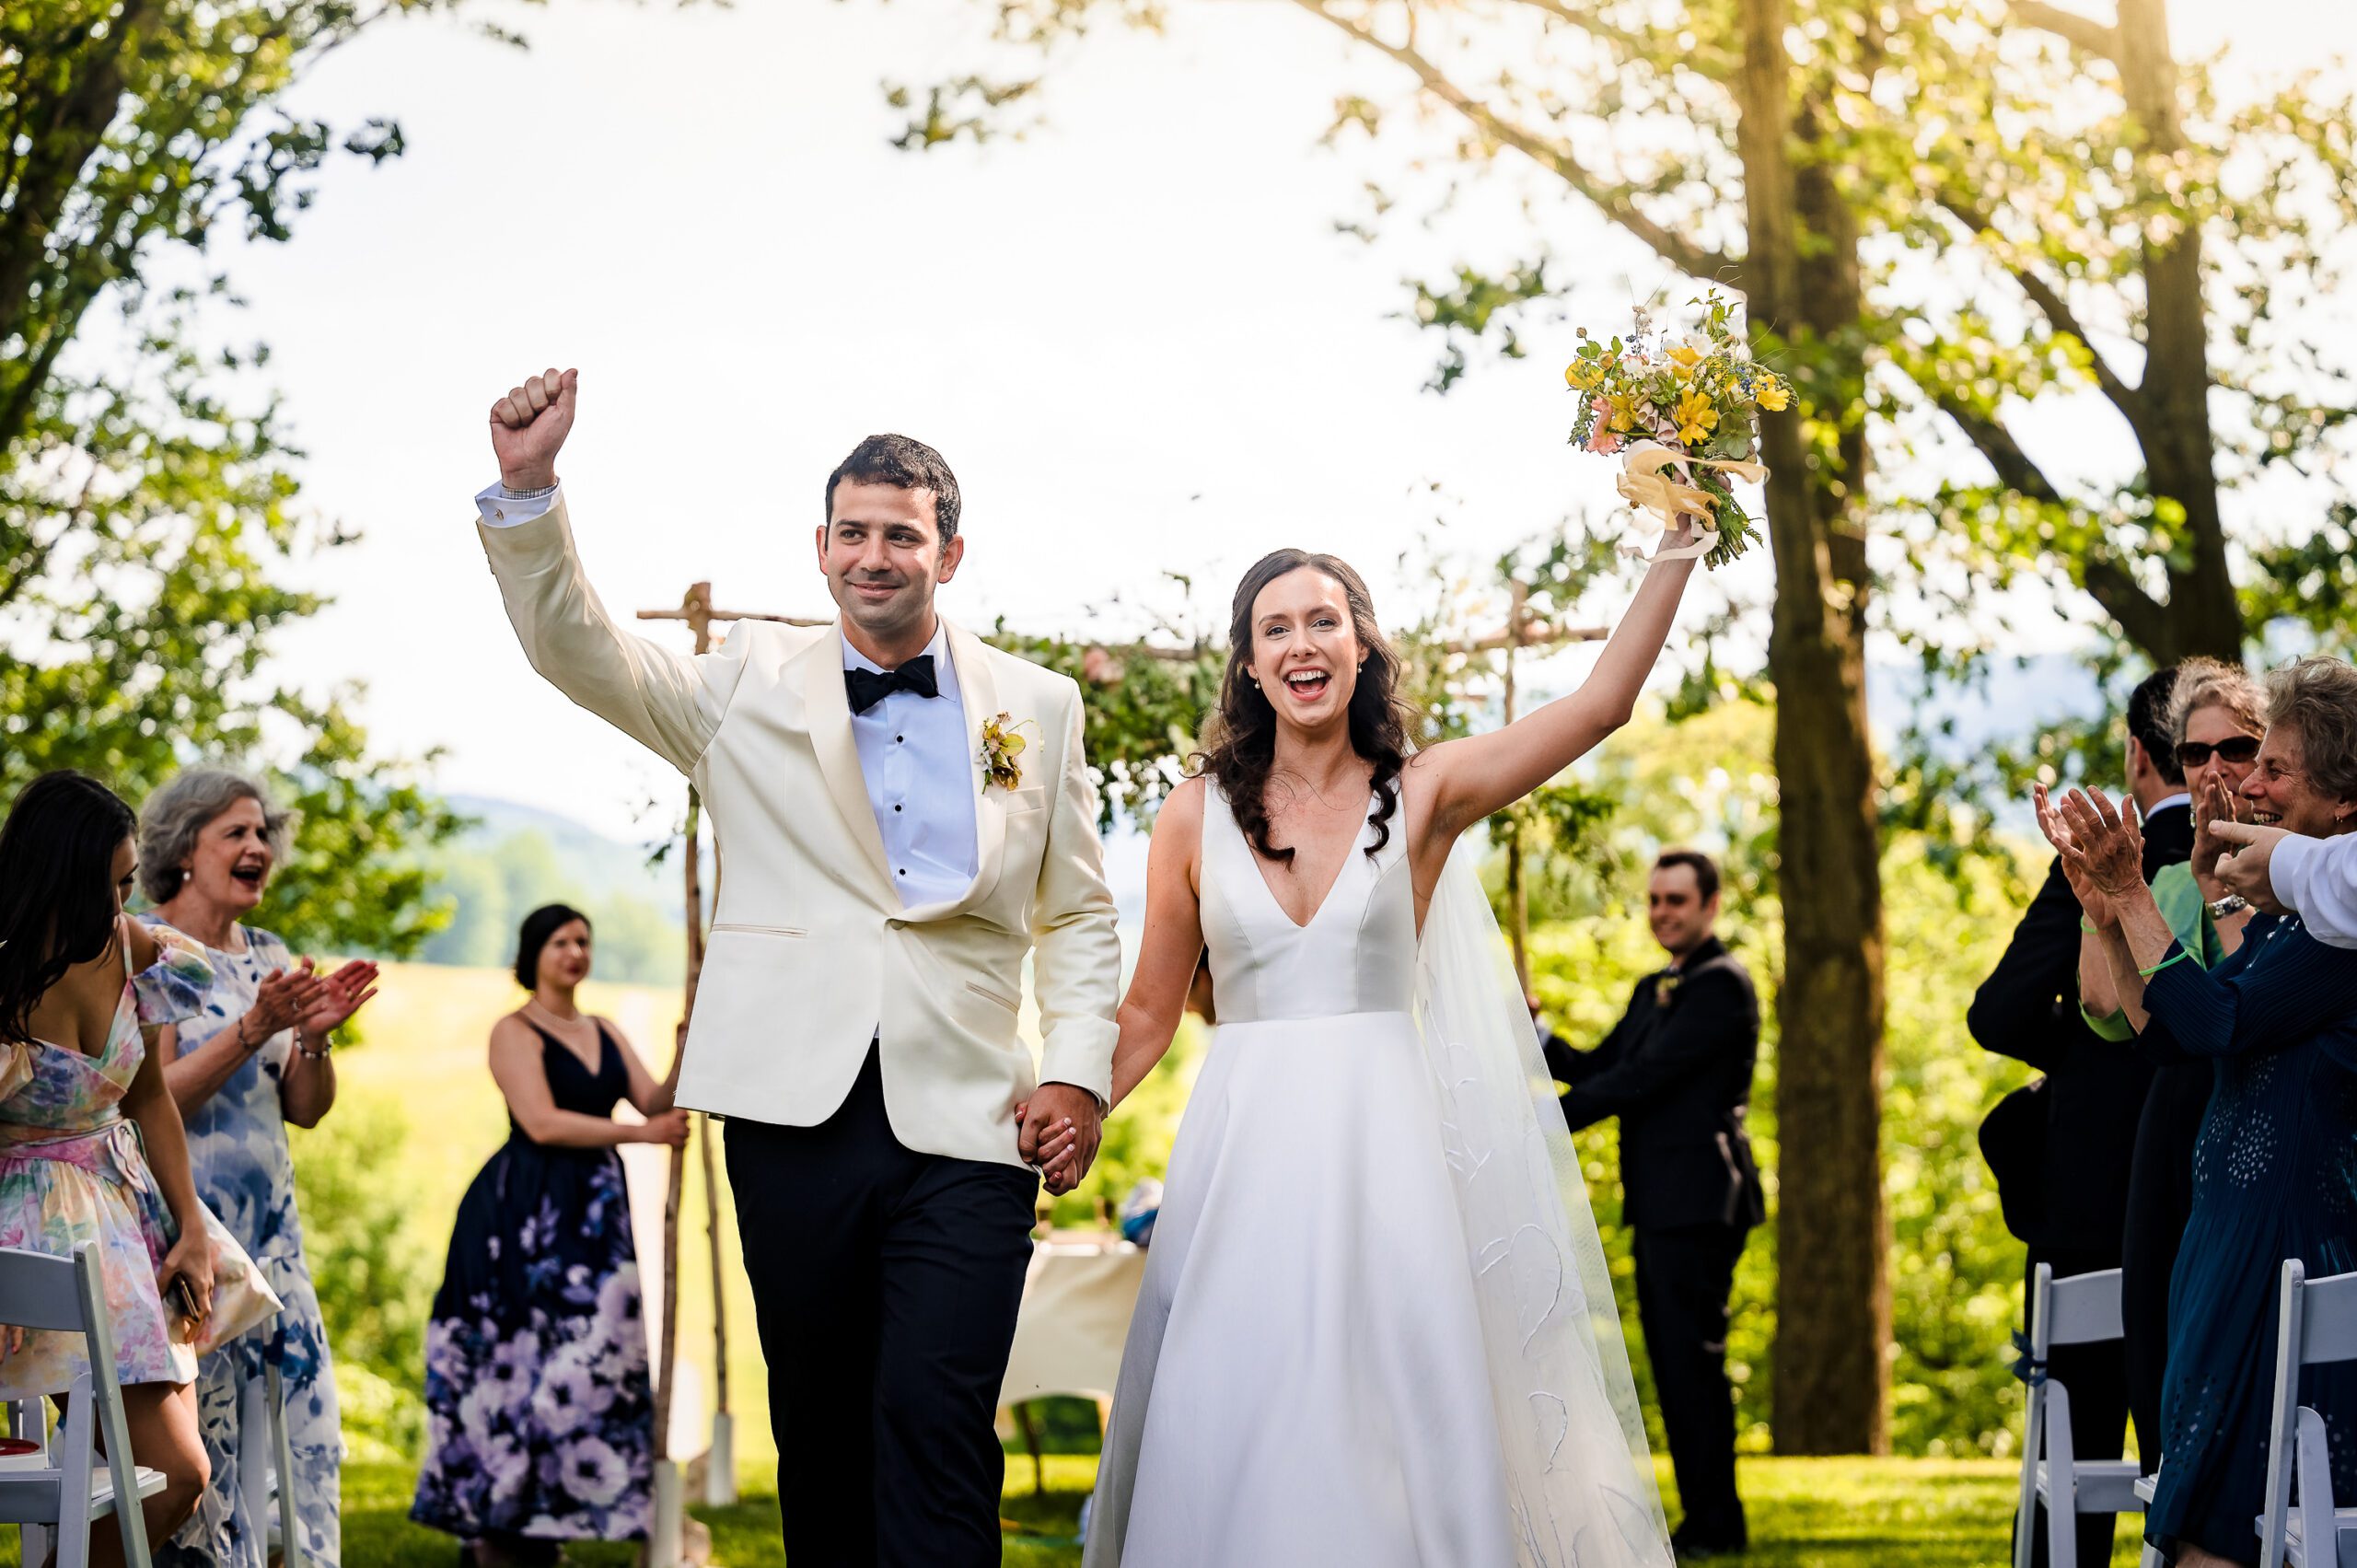 Smiling couple on their wedding day, showing the relaxed and natural moments captured in a stress-free timeline. (Ishan Fotografi, NJ Wedding Photographers)